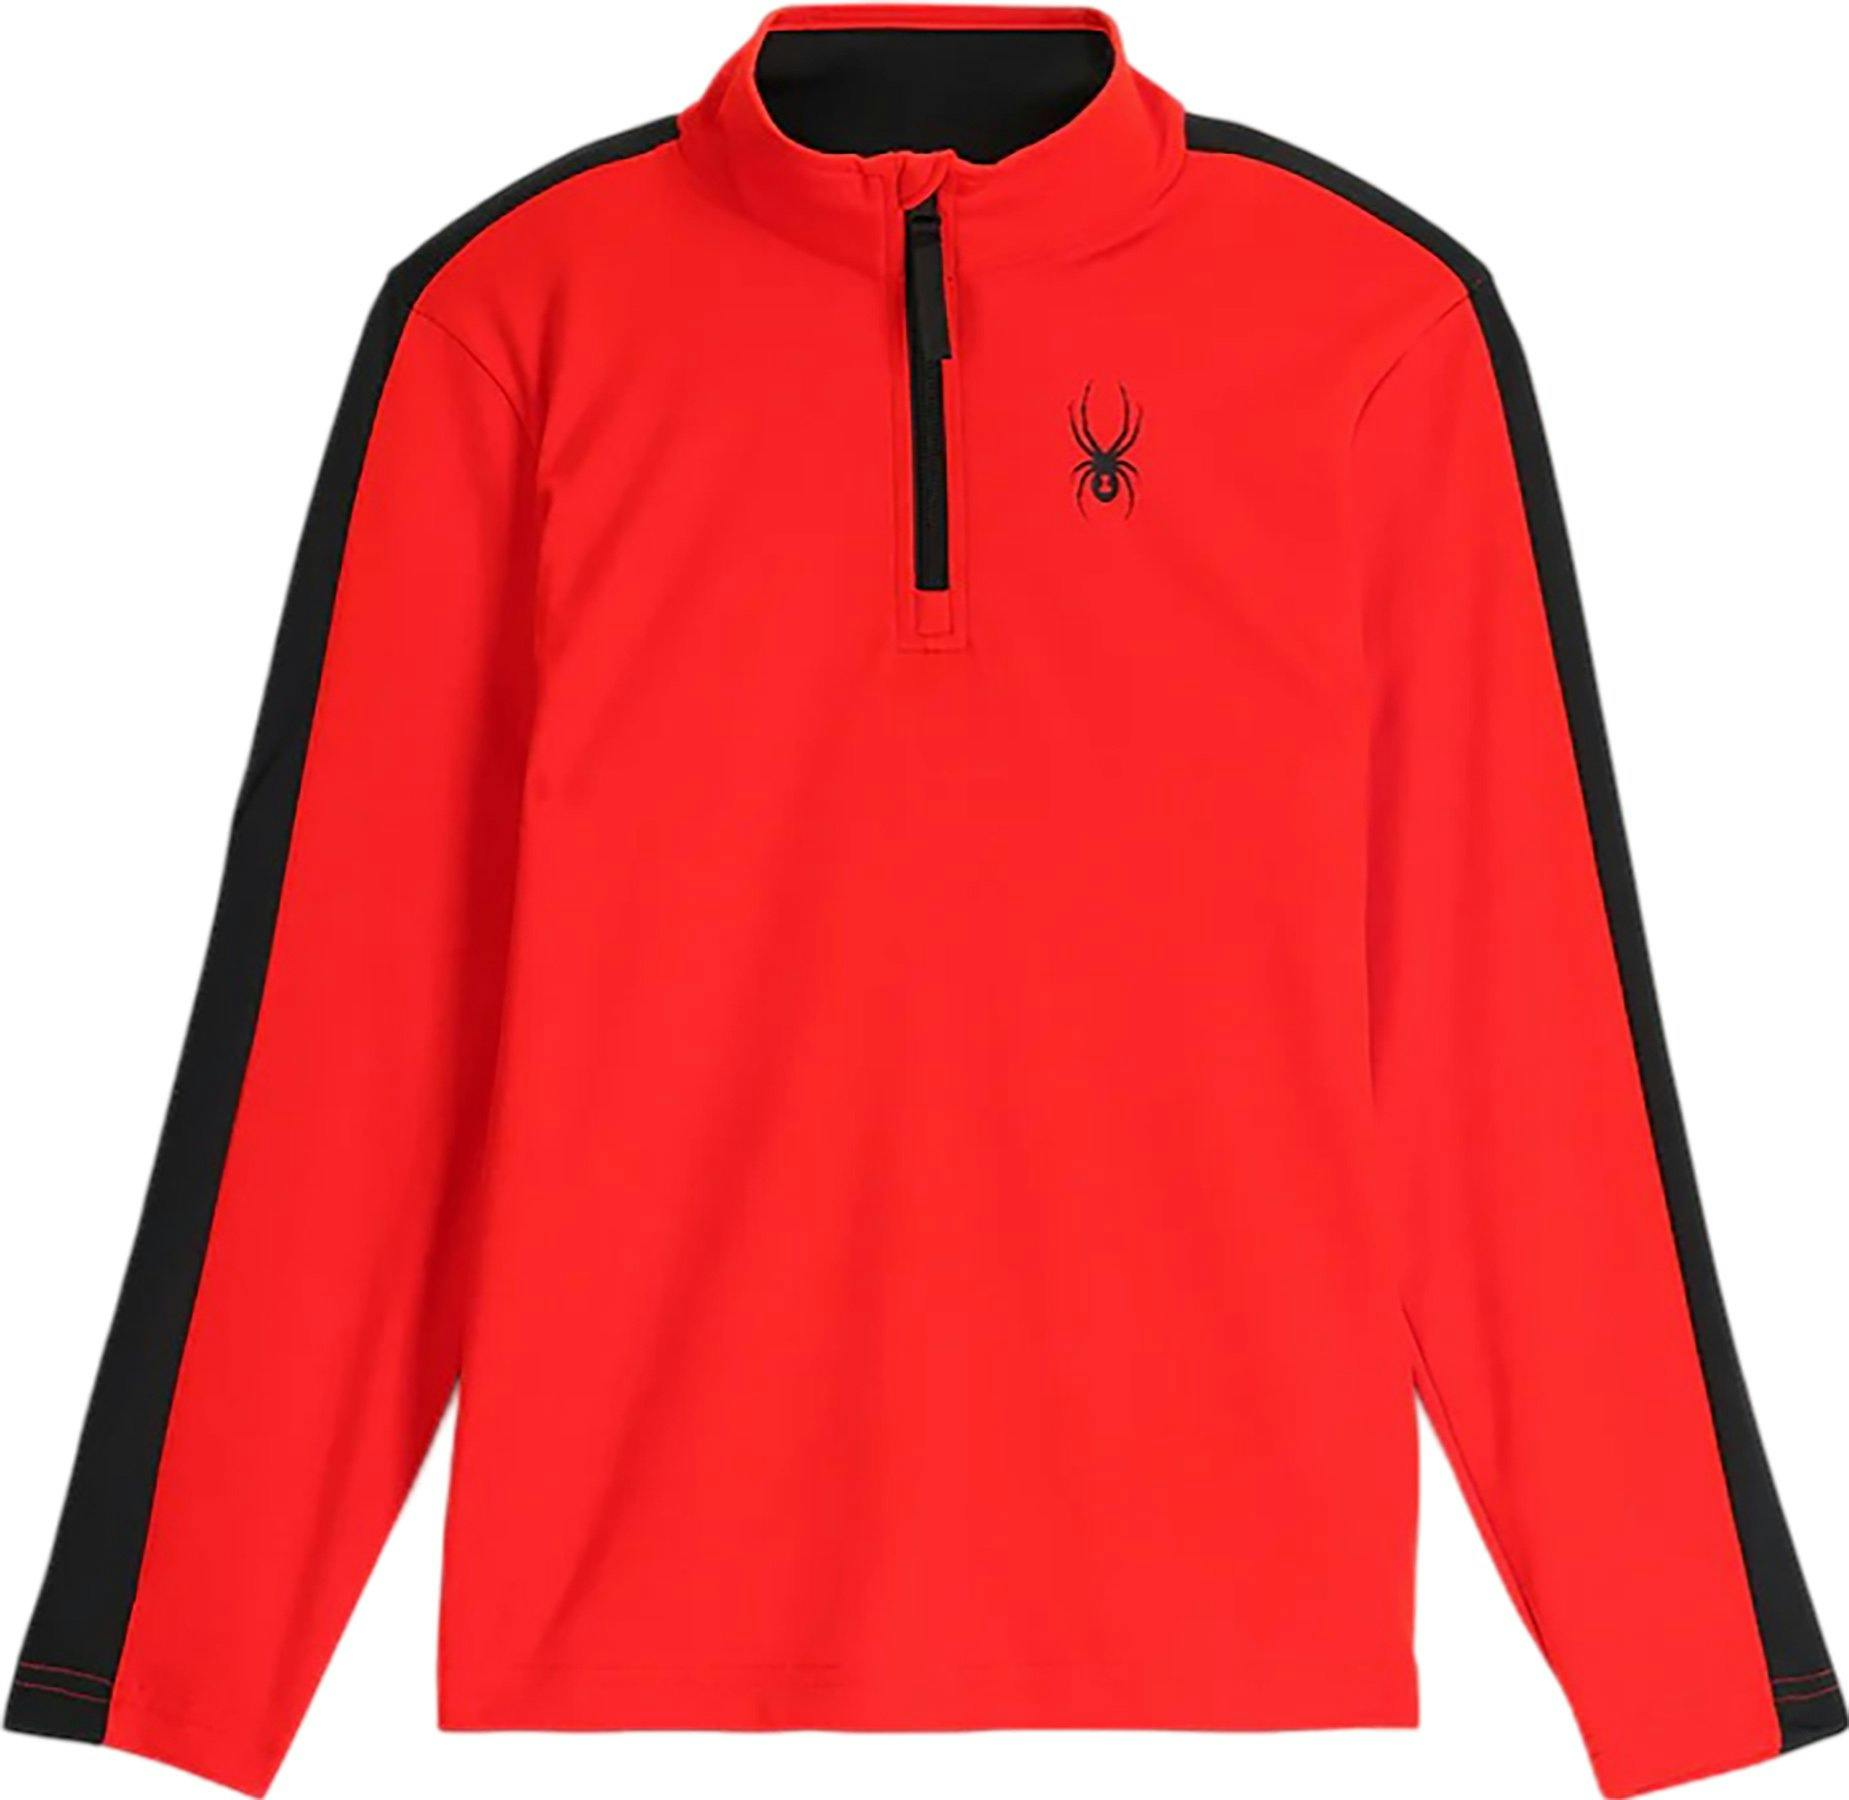 Product image for Base 1/2 Zip Base Layer Top - Boys